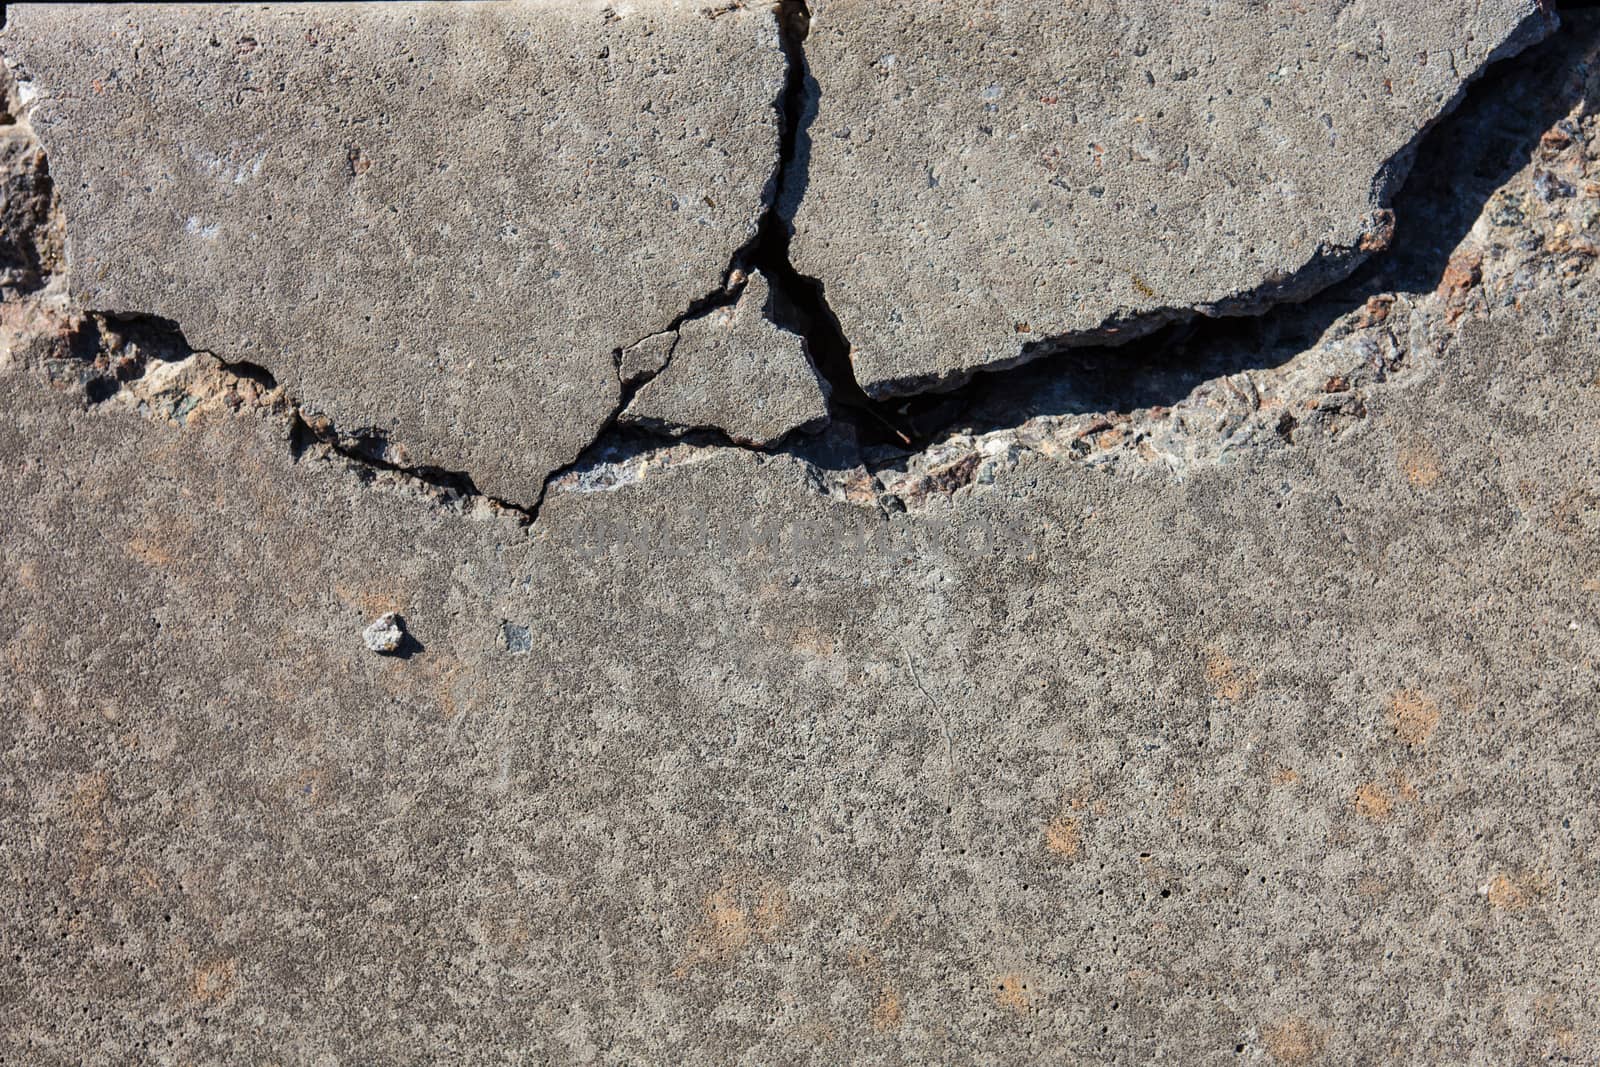 Cracked concrete surface. Background or texture.